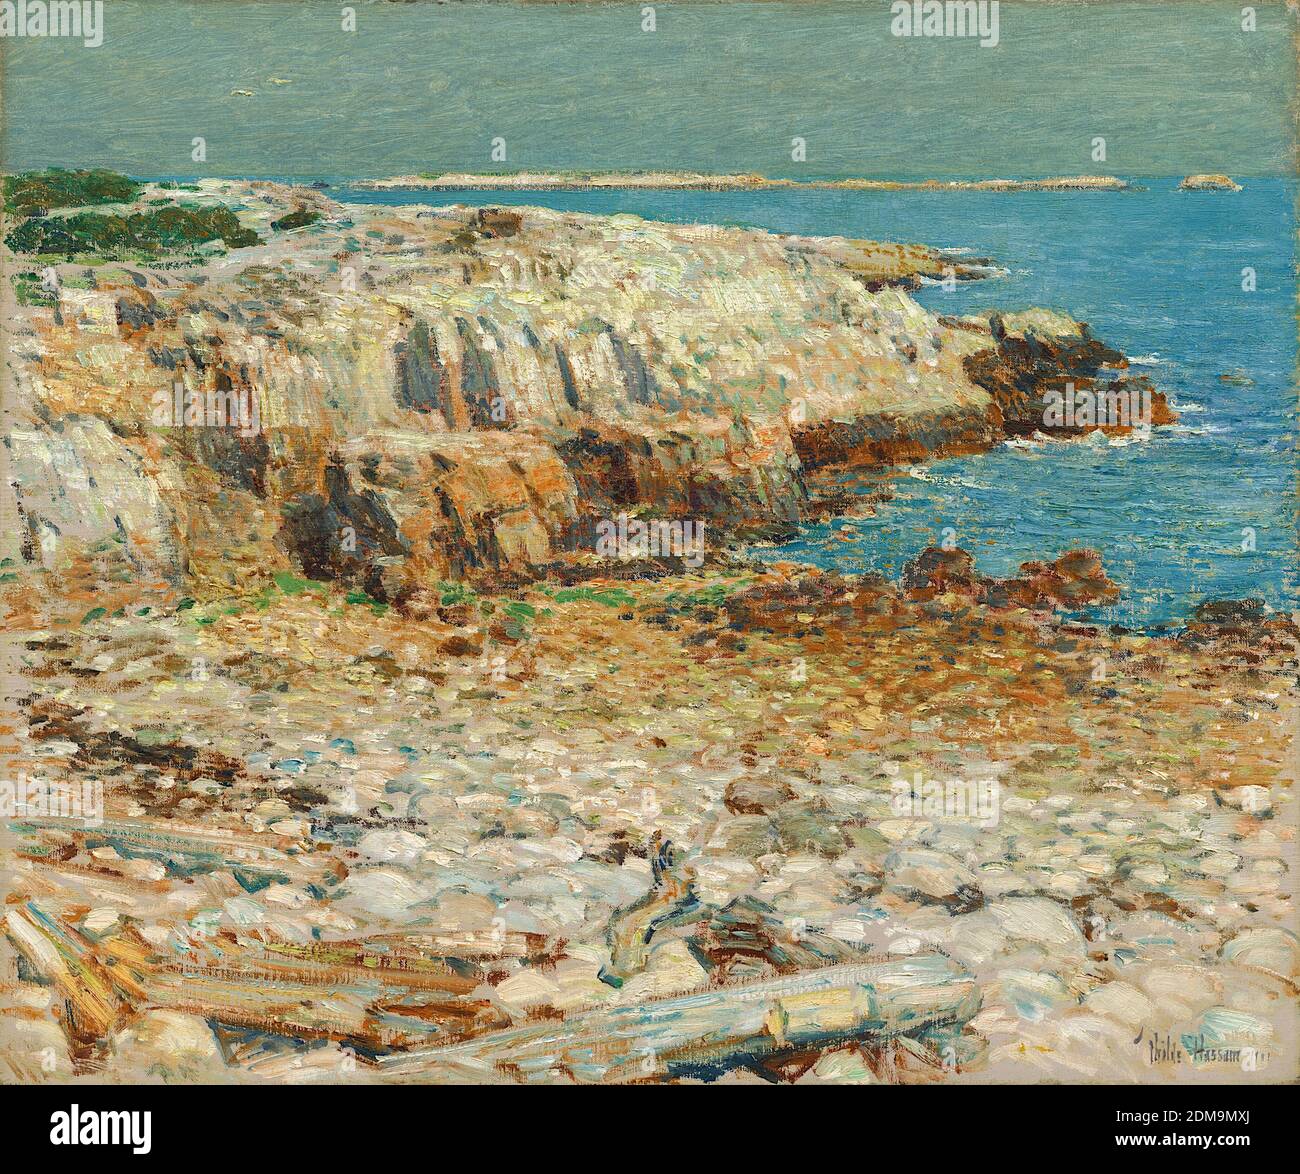 A North East Headland, 1901 American Impressionist Painting by Childe Hassam - Very high resolution and quality image Stock Photo